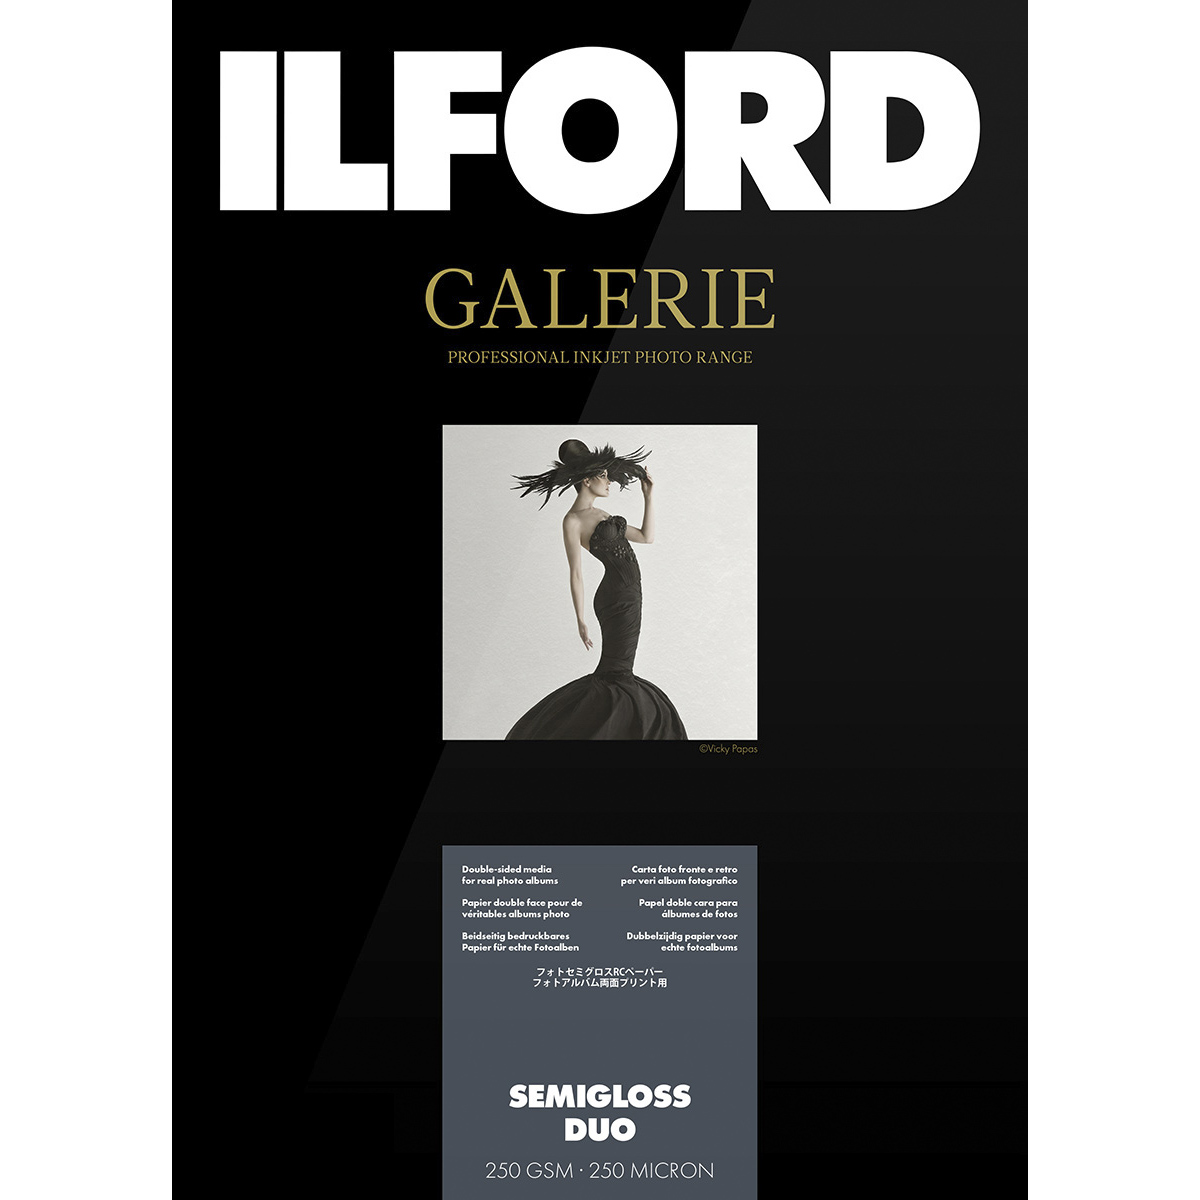 PAPEL ILFORD A3 25H GALERIE SEMIGLOSS DUO 250 GRM